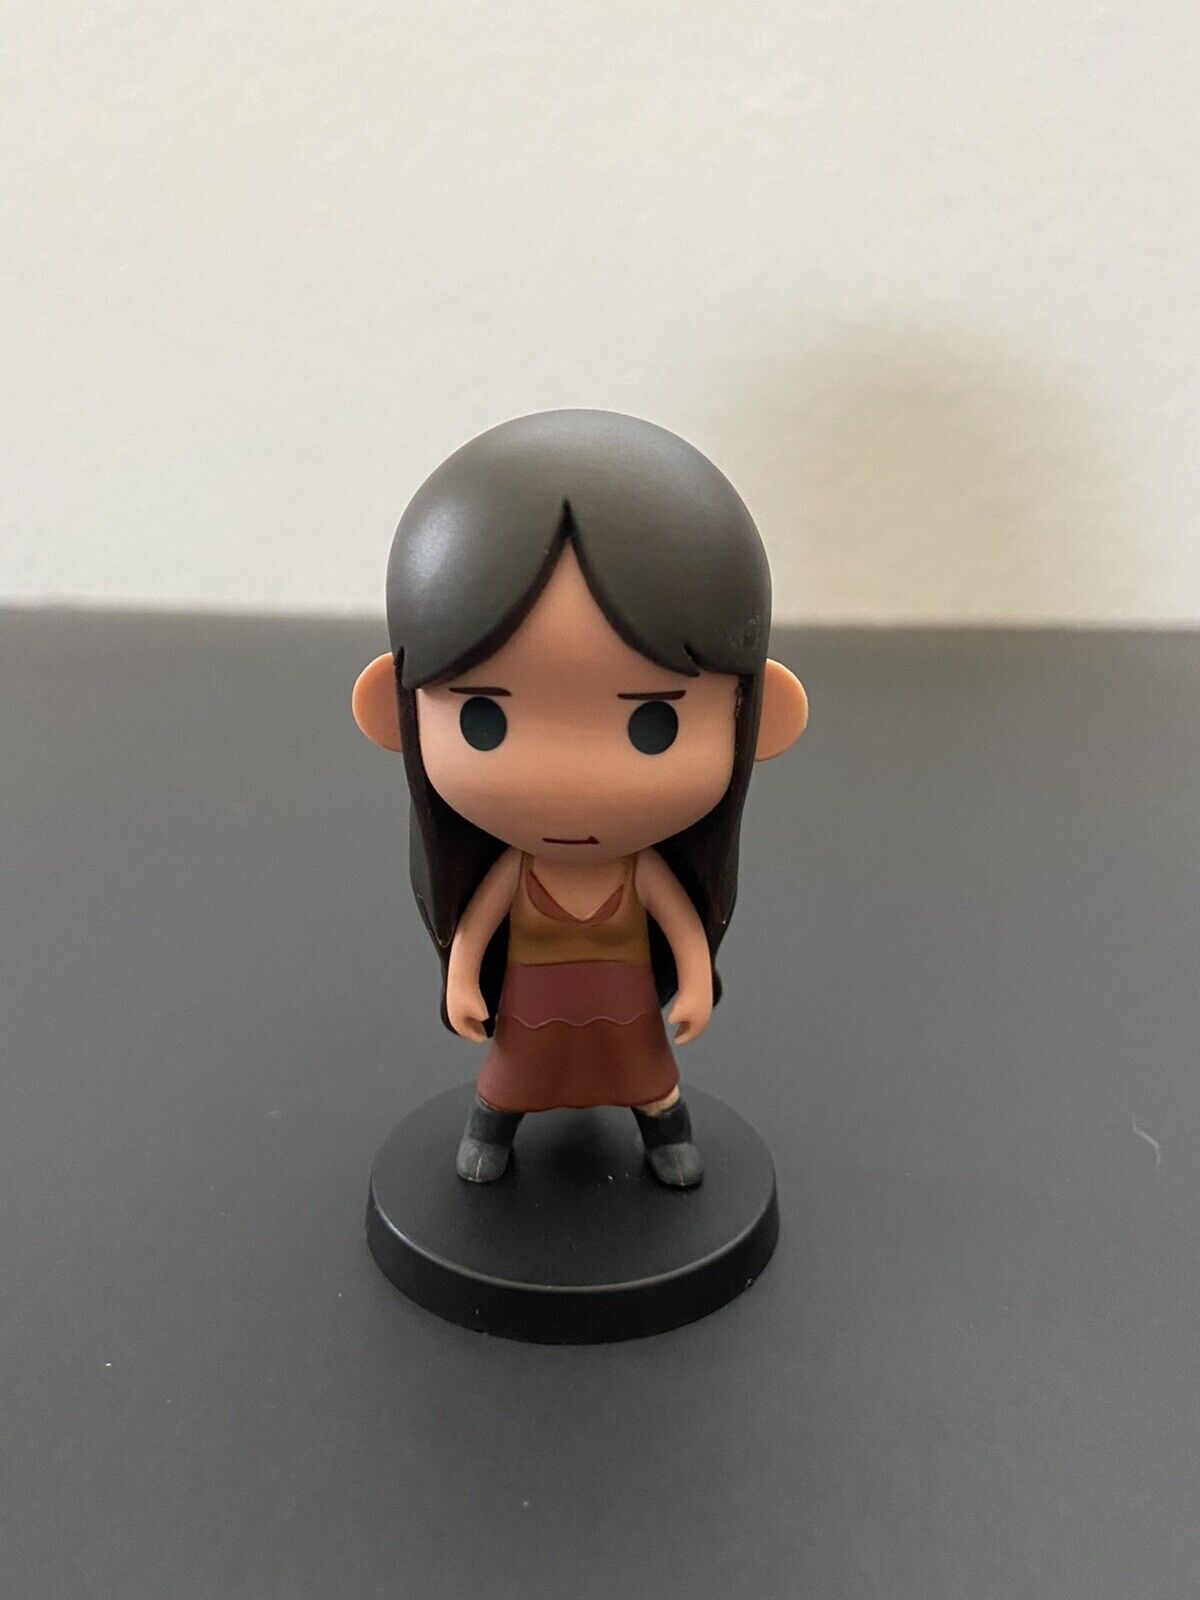 Firefly Vinyl Figure River Series 2 Qbits Loot Crate Exclusive